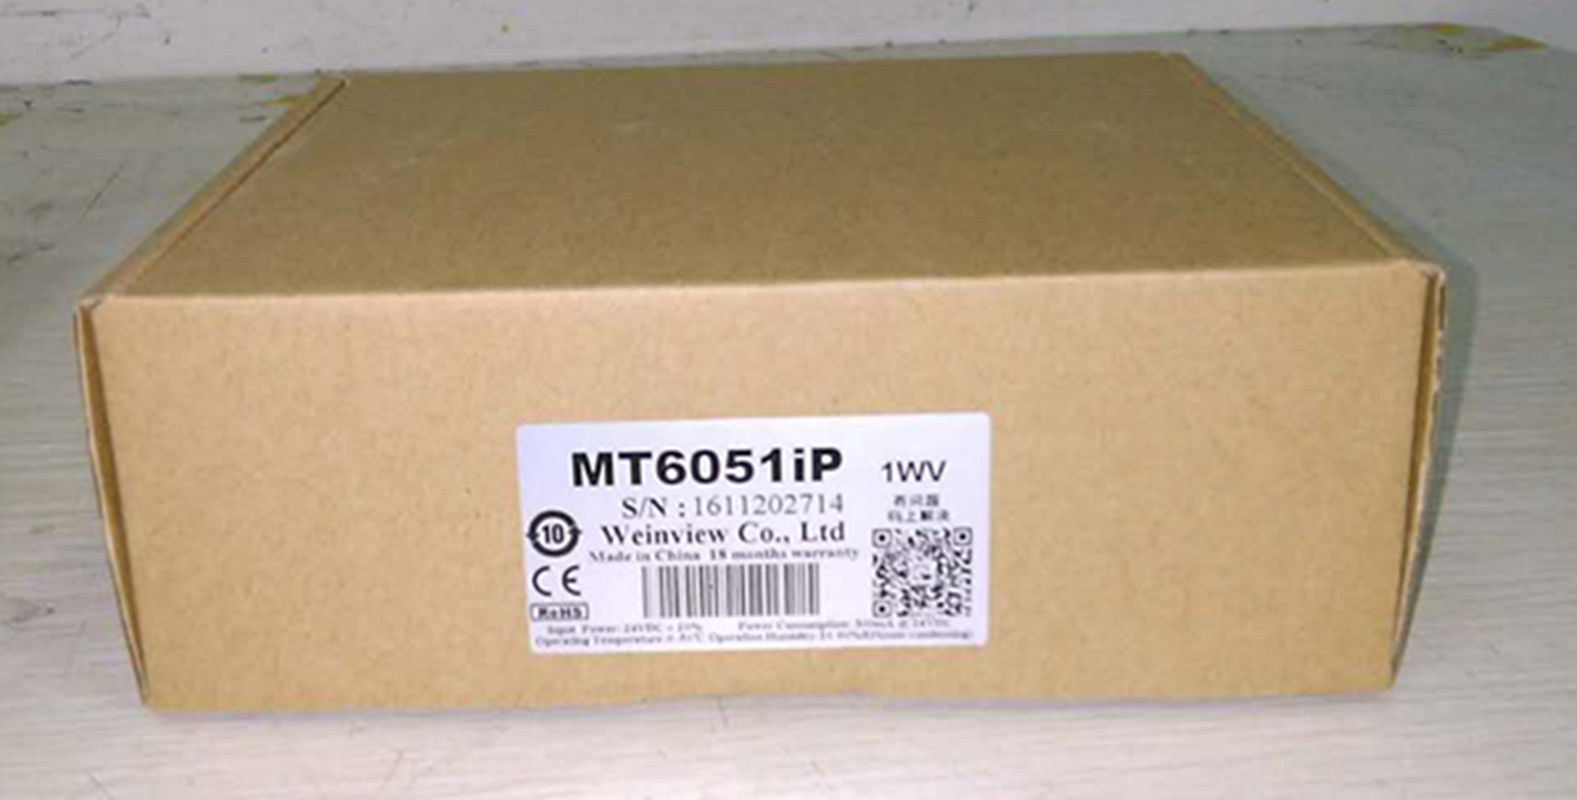 MT6051IP weinview 4.3inch HMI touch screen new in box replace MT6050iP